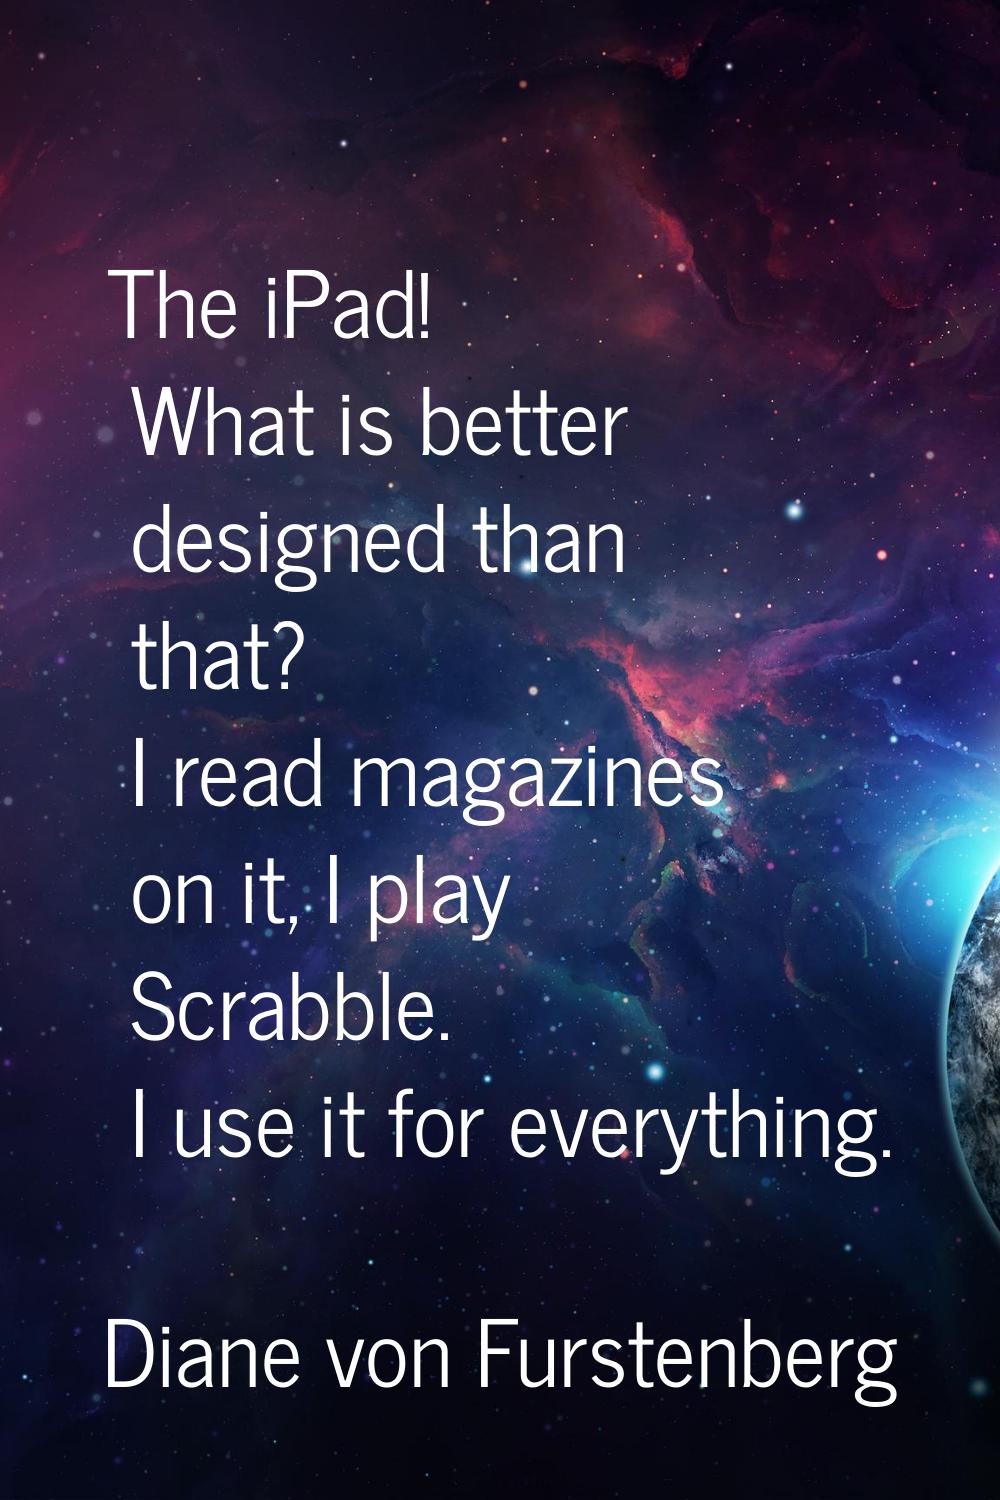 The iPad! What is better designed than that? I read magazines on it, I play Scrabble. I use it for 